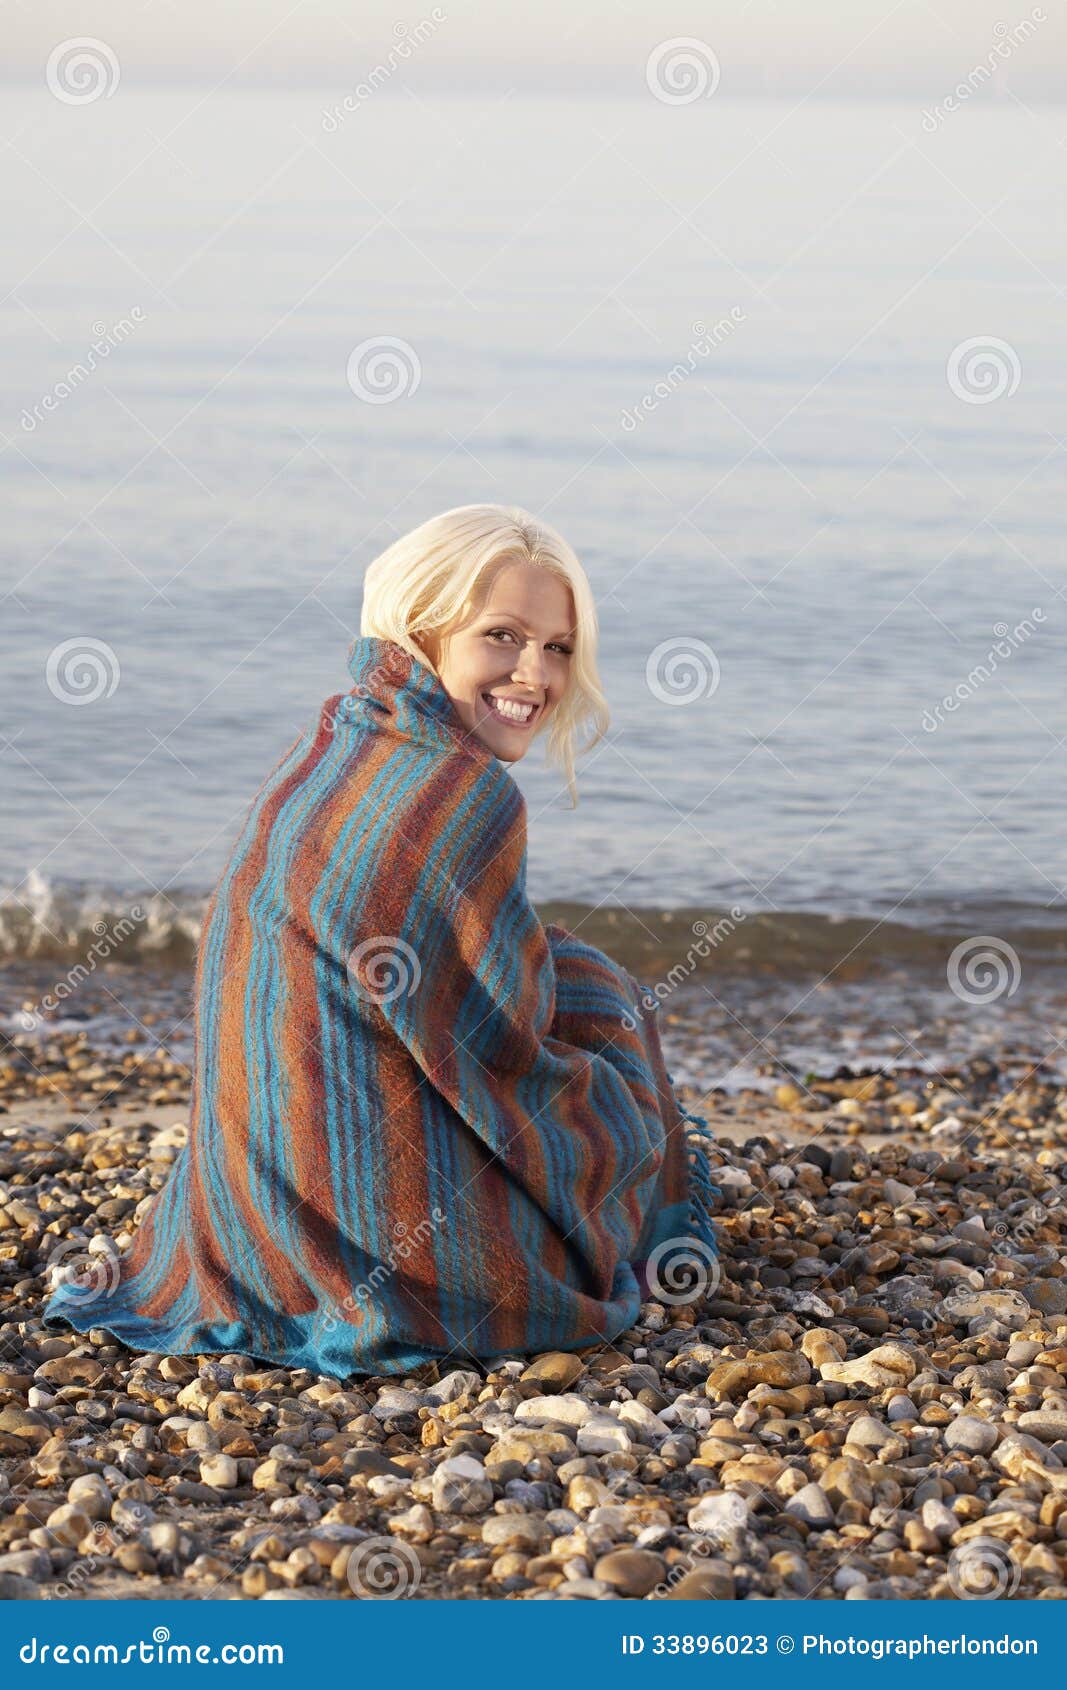 Woman Wrapped In Blanket Sitting At Beach Stock Image